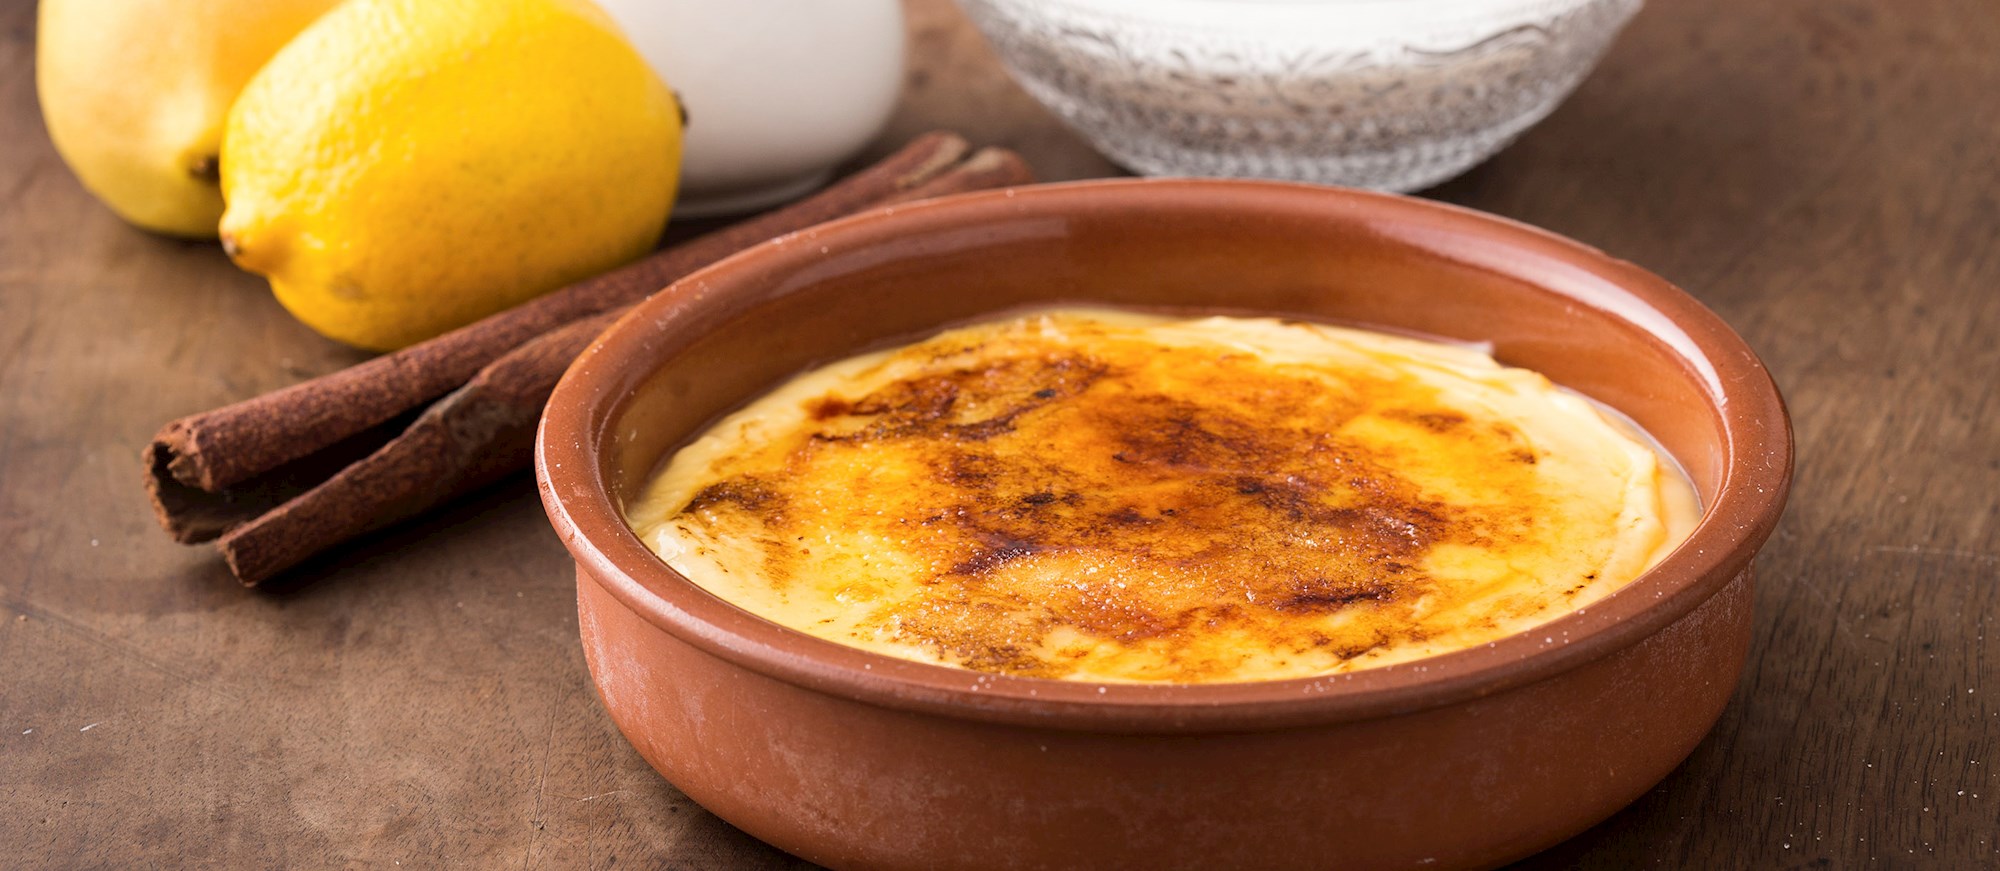 Where to Eat the Best Crema Catalana in the World? | TasteAtlas